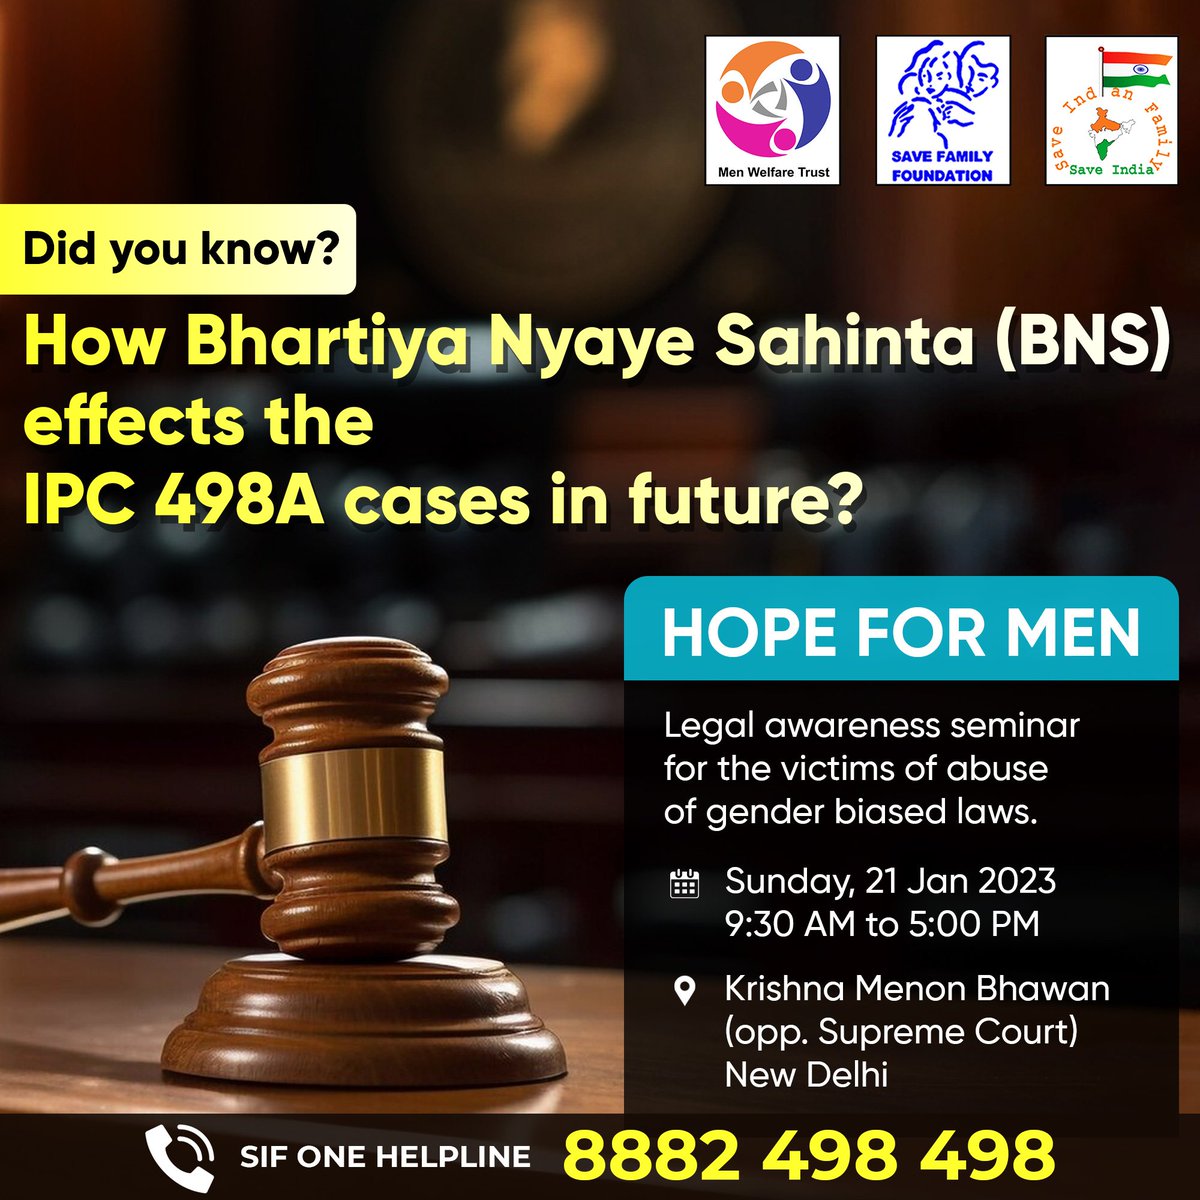 Men from Delhi-NCR & near-by places, if ur facing false dowry cases, DV, Maintenance cases,
going through difficult divorce or anticipating this & want to know how to cope up & fight back in such situations, then be there at #HopeForMen seminar, Sun, 21 Jan, 9:30 AM to 5:00 PM.